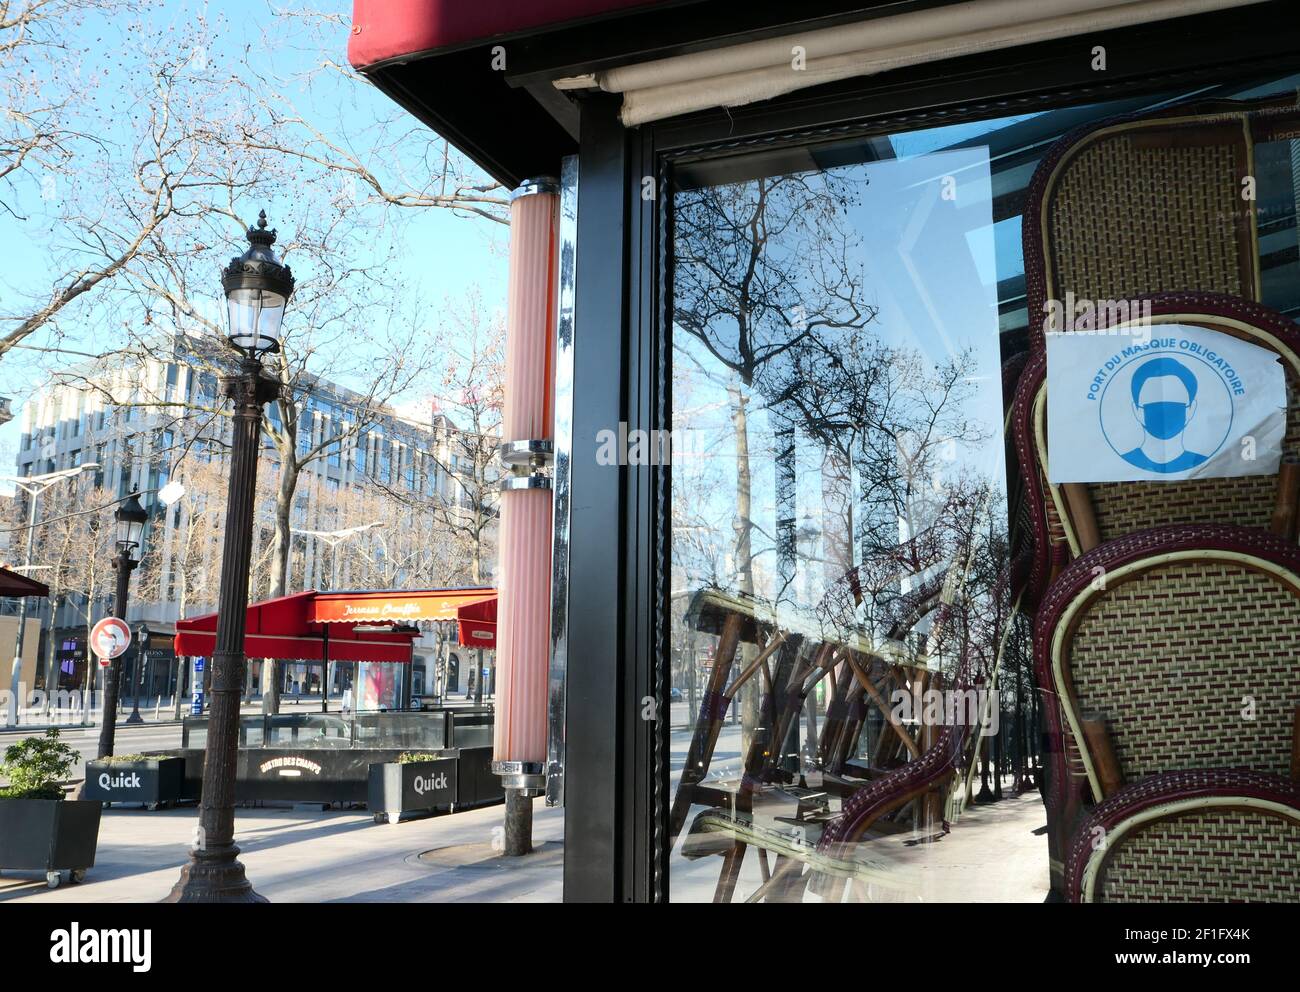 Paris, France. March 07. 2021. Famous restaurant on the Champs-Elysées avenue. Closed business without customers. Chairs stacked in the window. Stock Photo